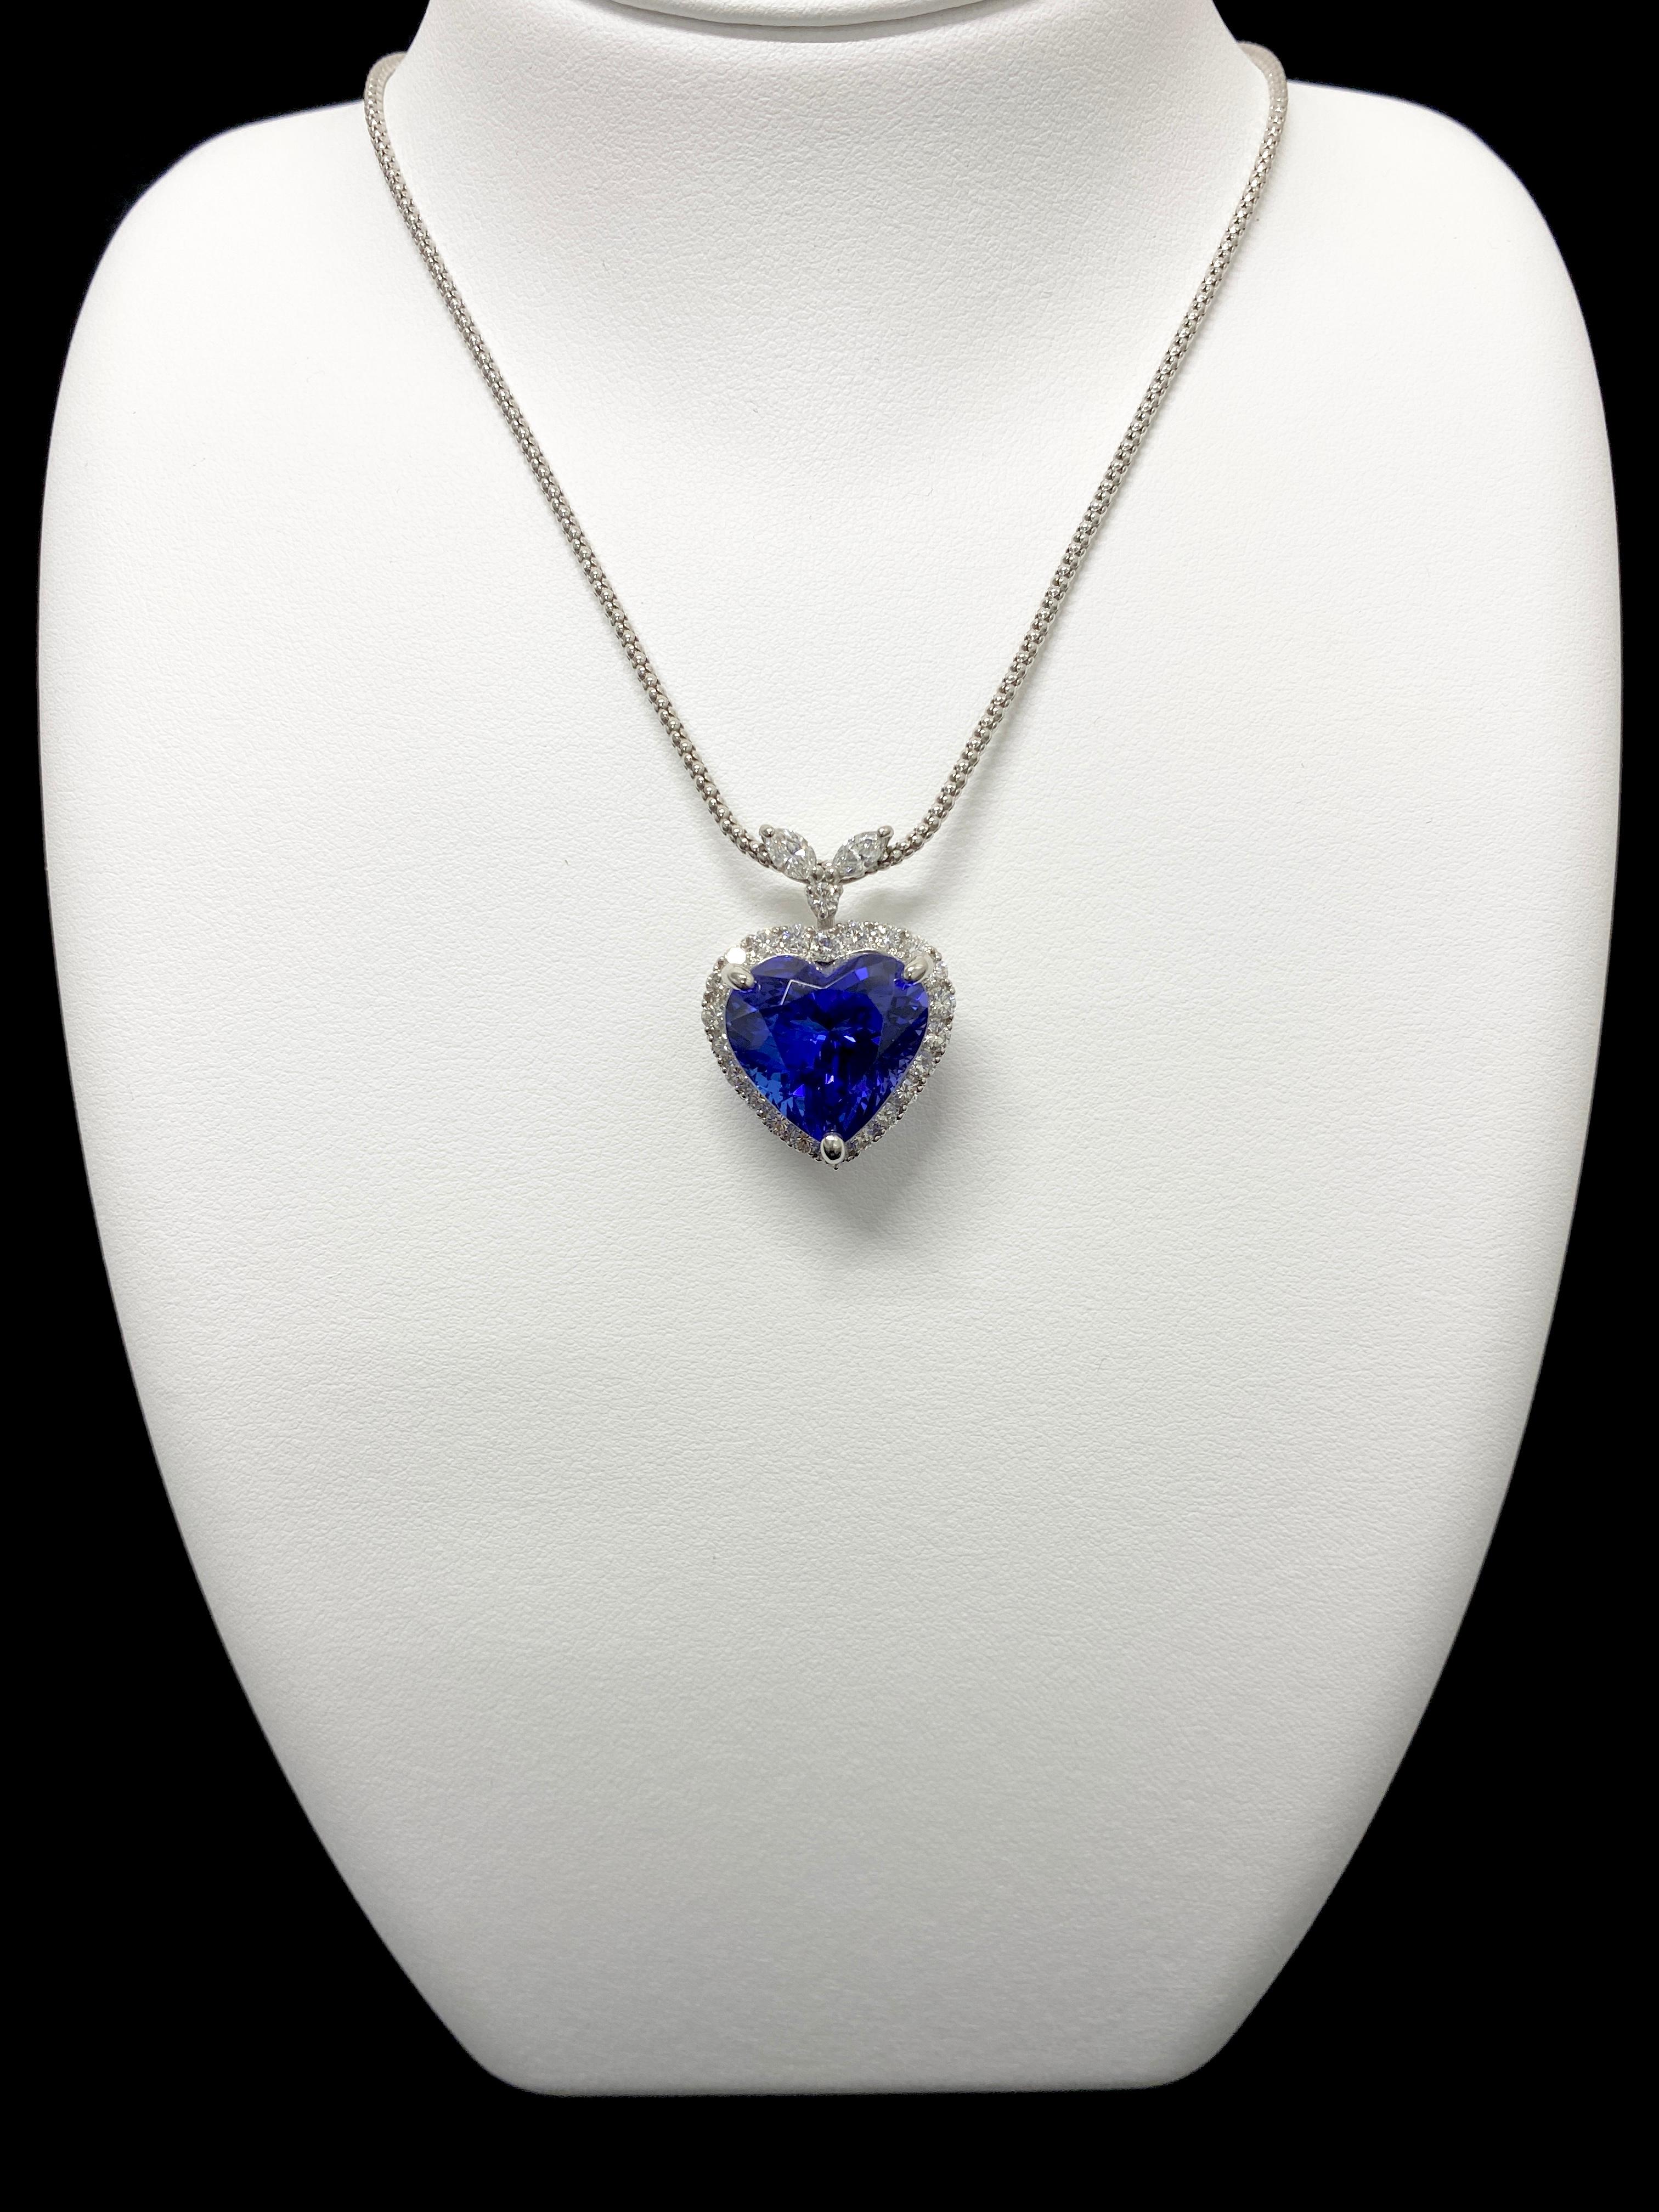 A beautiful Necklace featuring a 17.34 Carat, Natural, Heart-Cut Tanzanite and 1.45 Carats of Diamond Accents set in Platinum. Tanzanite's name was given by Tiffany and Co after its only known source: Tanzania. Tanzanite displays beautiful